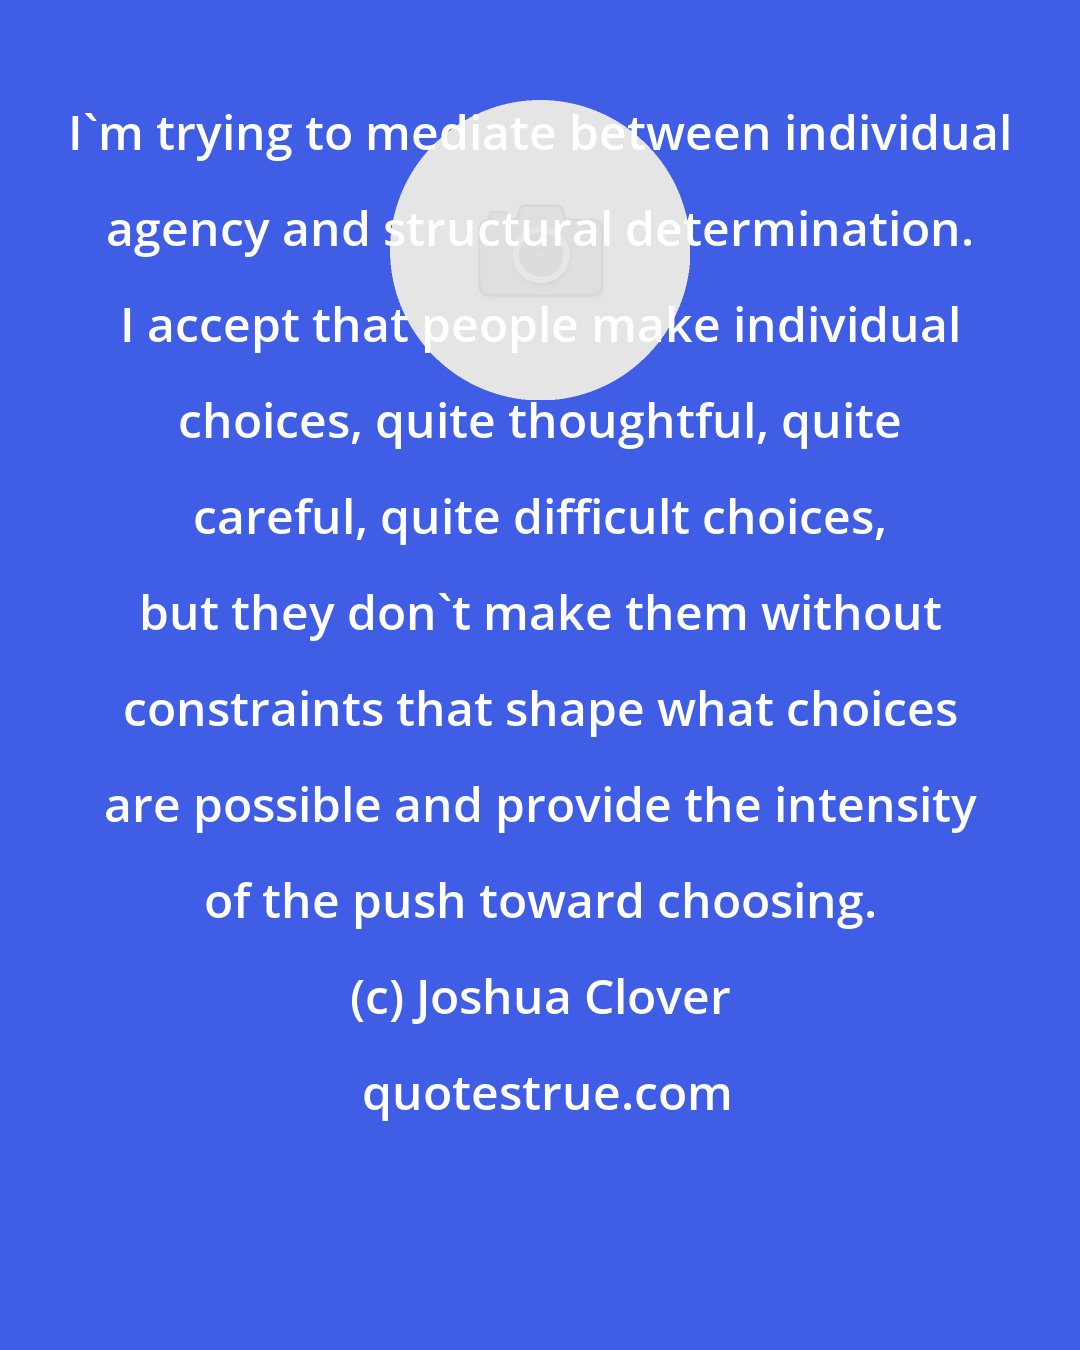 Joshua Clover: I'm trying to mediate between individual agency and structural determination. I accept that people make individual choices, quite thoughtful, quite careful, quite difficult choices, but they don't make them without constraints that shape what choices are possible and provide the intensity of the push toward choosing.